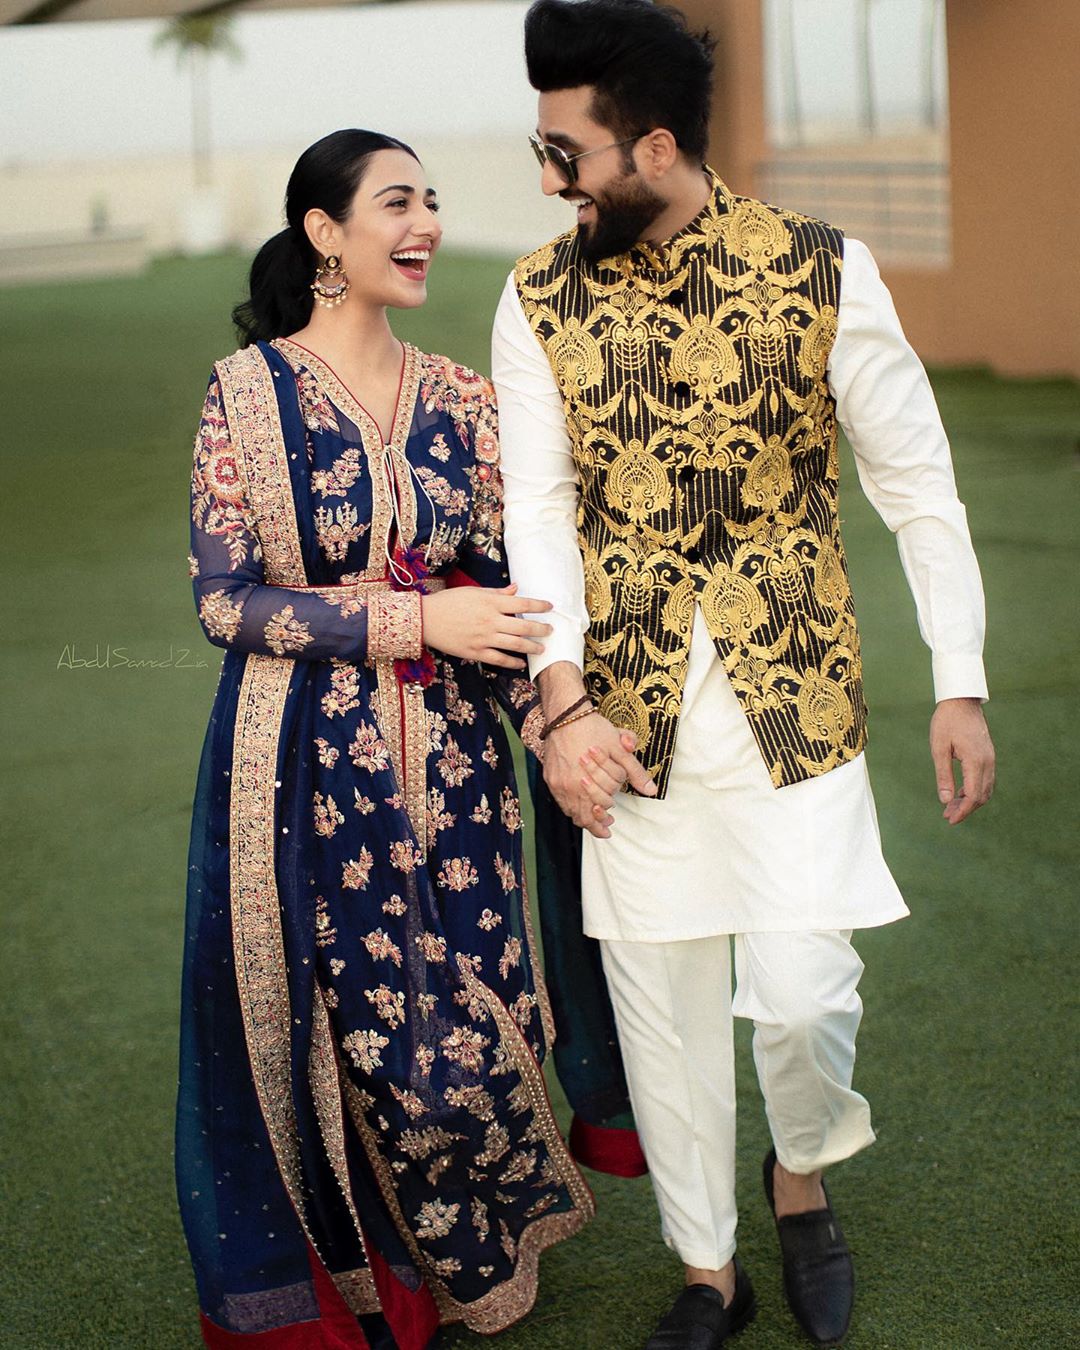 Newly Wed Couple Sarah Khan and Falak Shabbir Eid Pictures